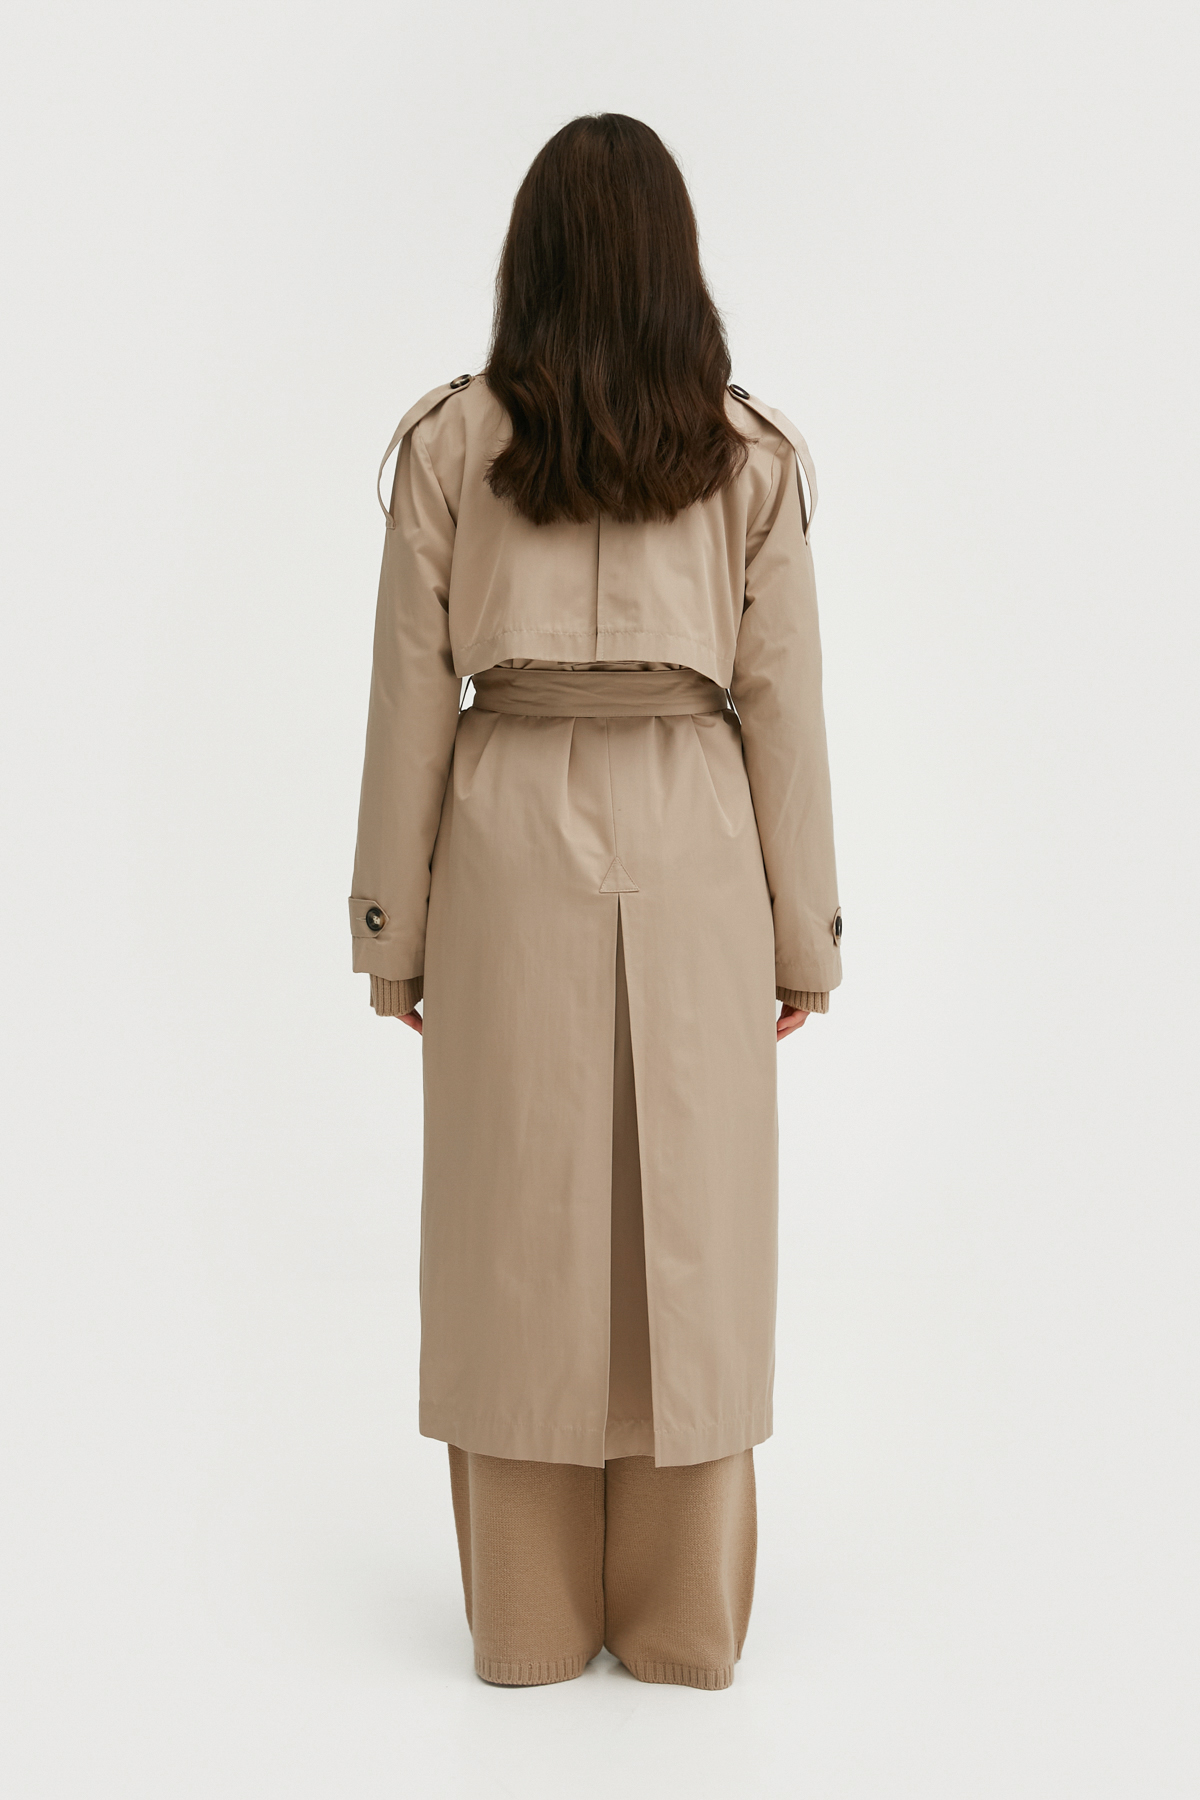 Beige trench coat with a straight silhouette, photo 5